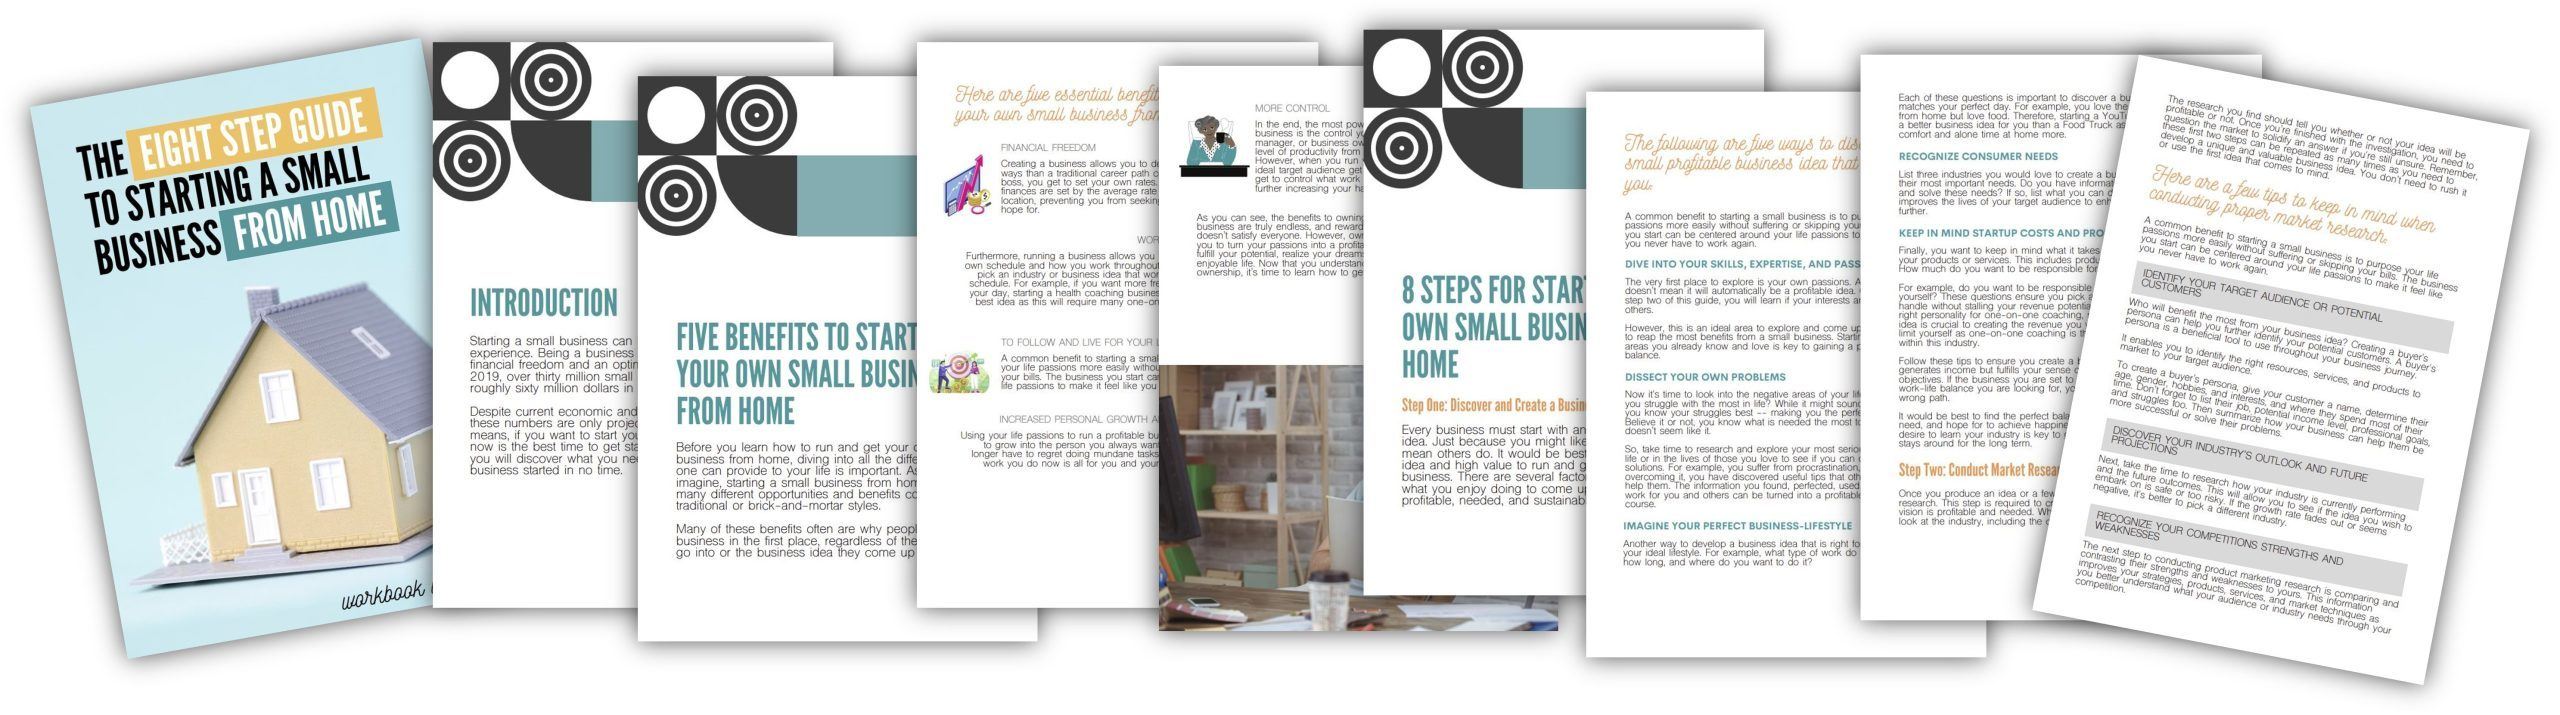 Starting a Small Business Canva Template